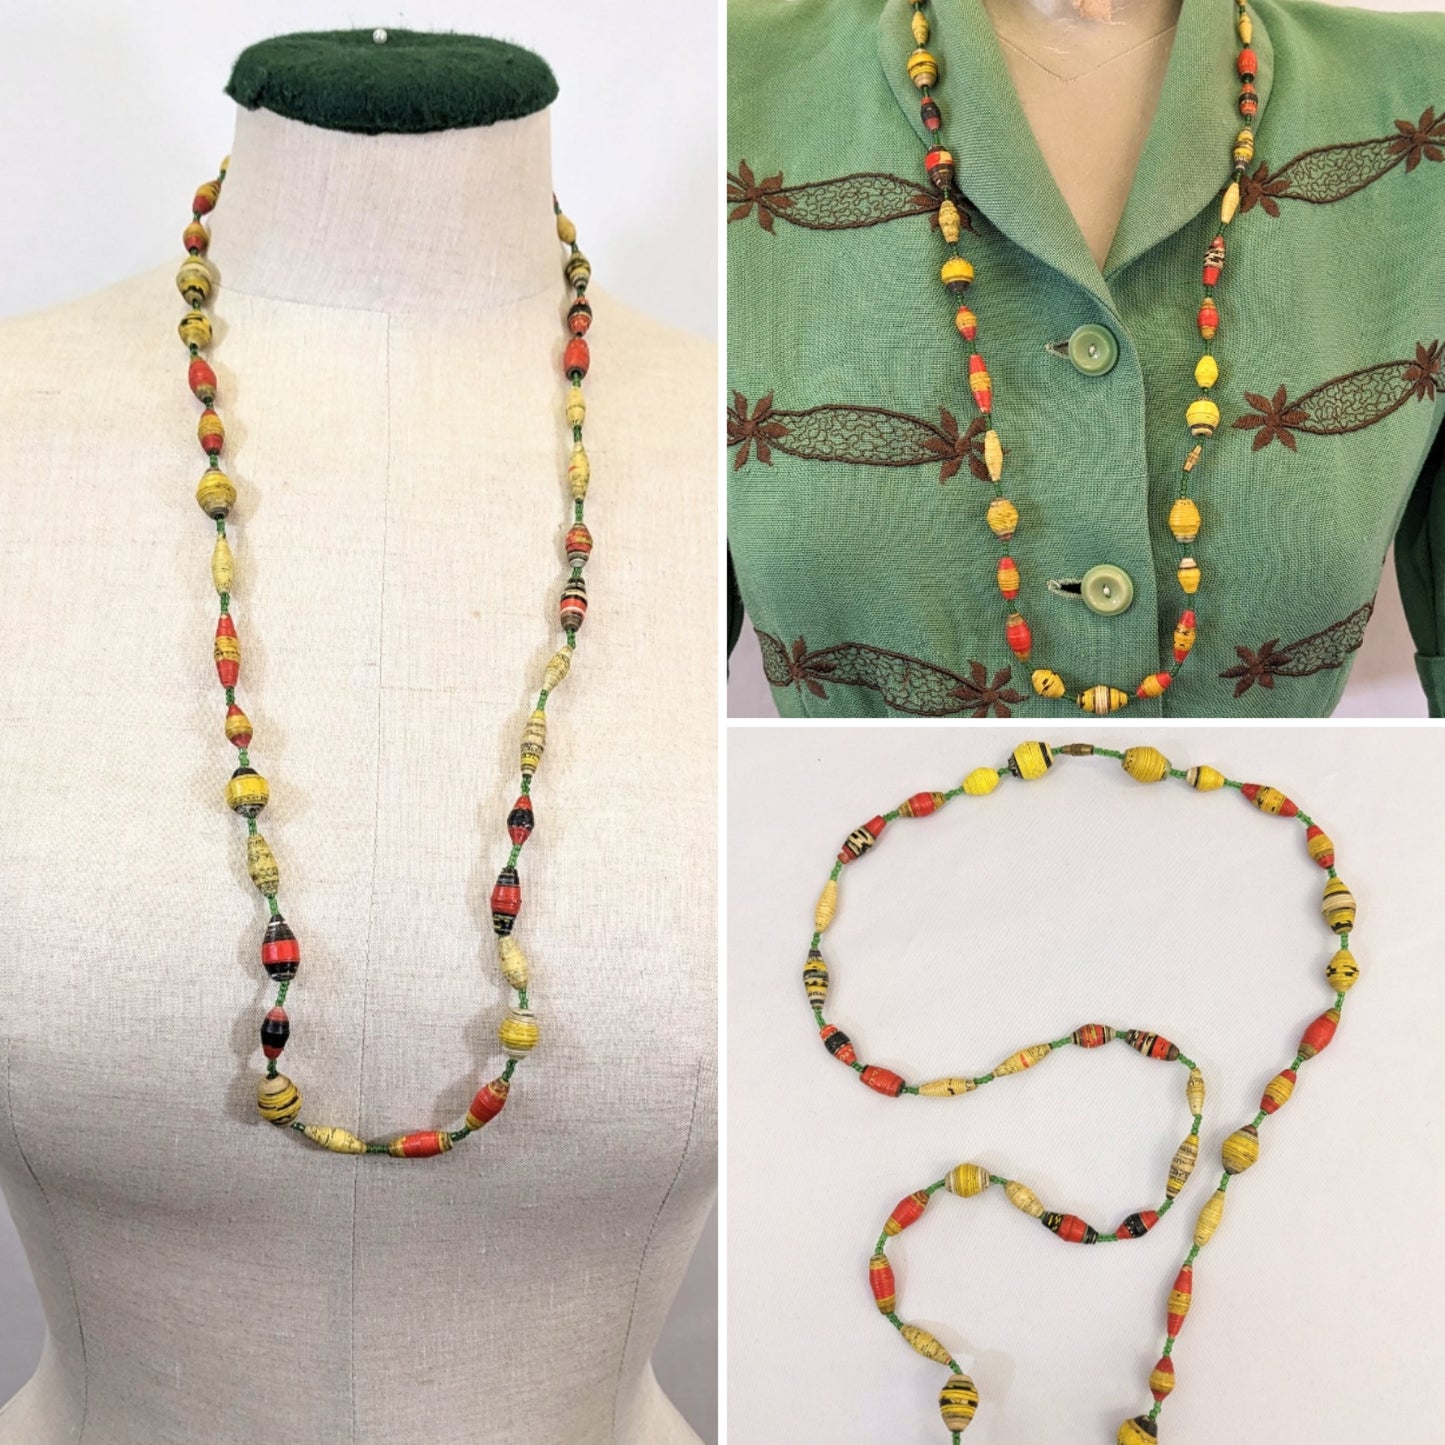 Late 1930s/early 1940s Wooden Necklace